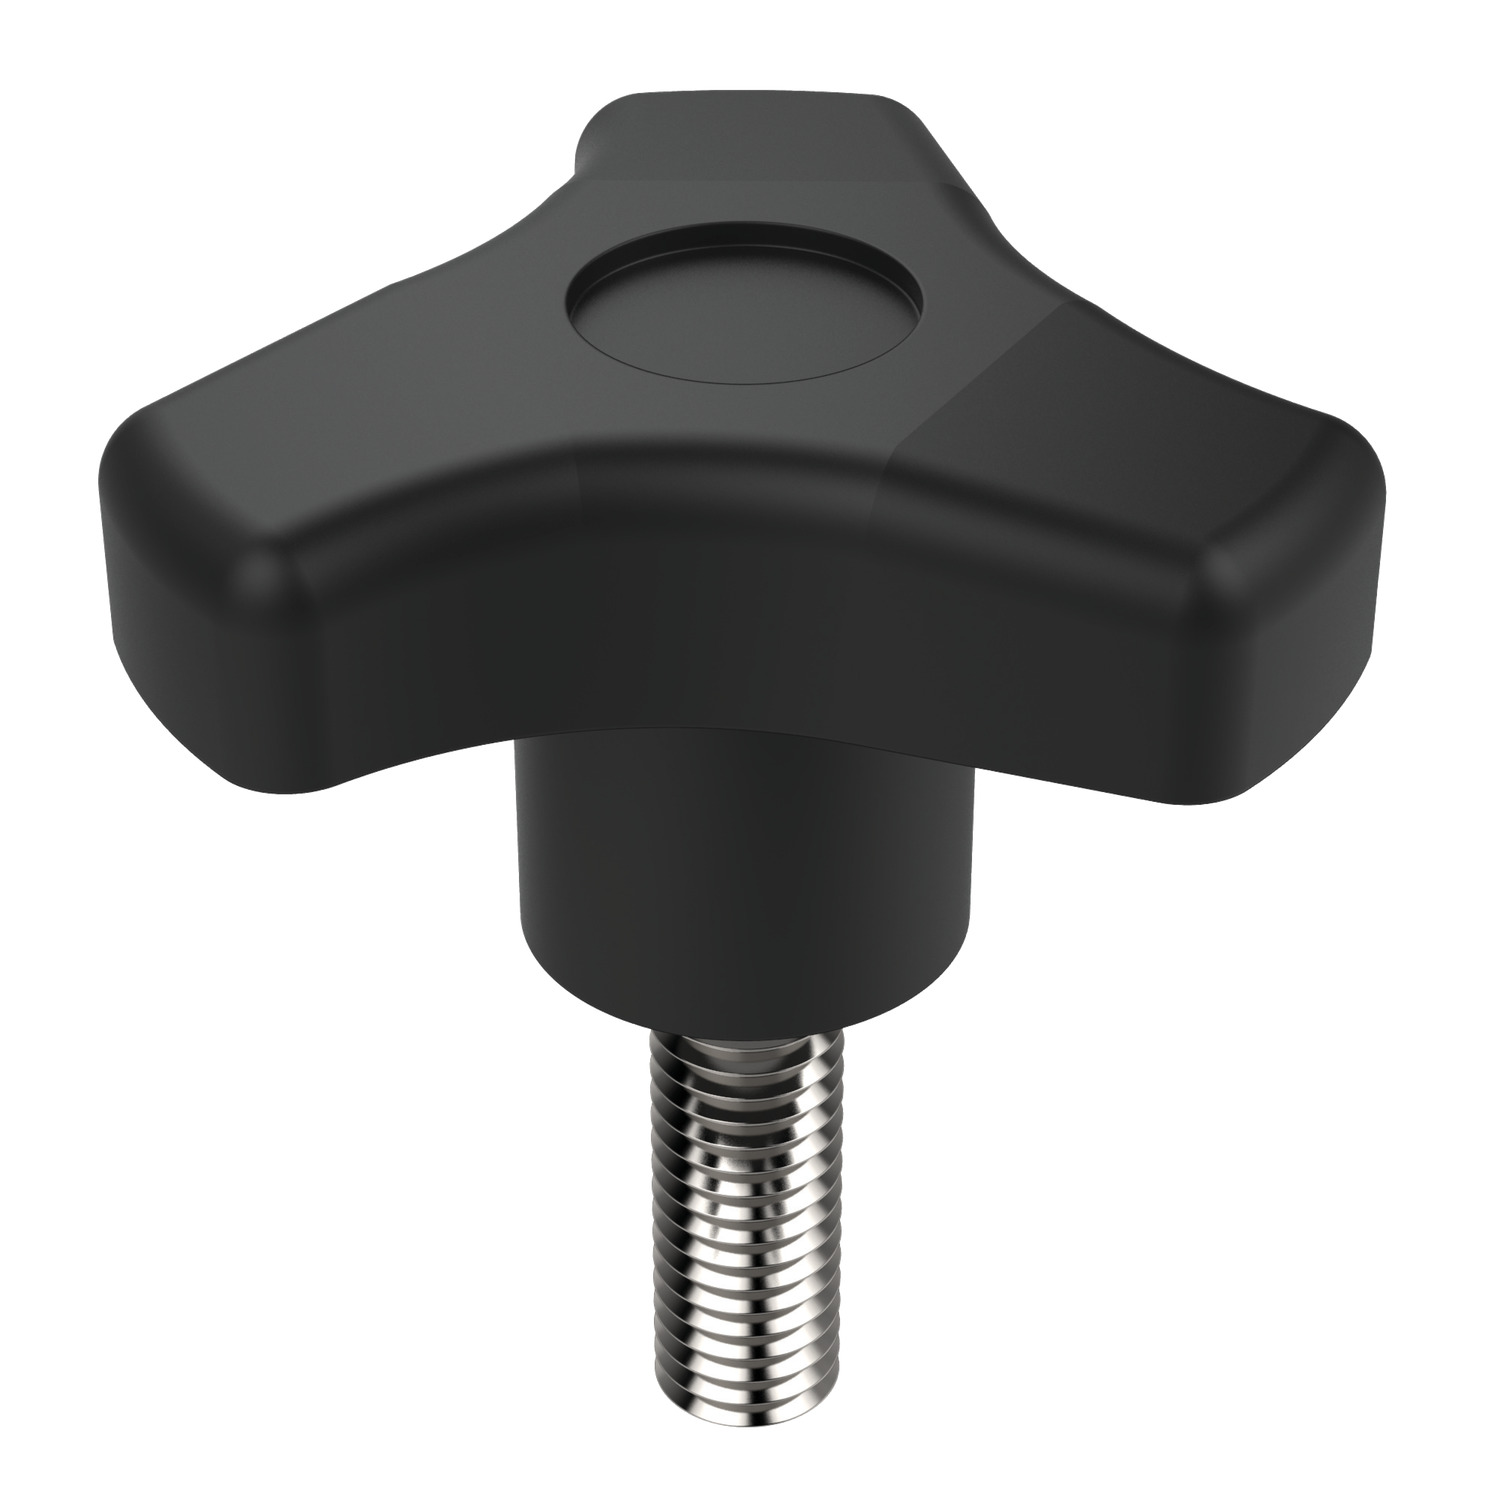 Three Lobed Knobs Screw material is zinc-plated steel stud. Grip material is thermoplastic, matte black.